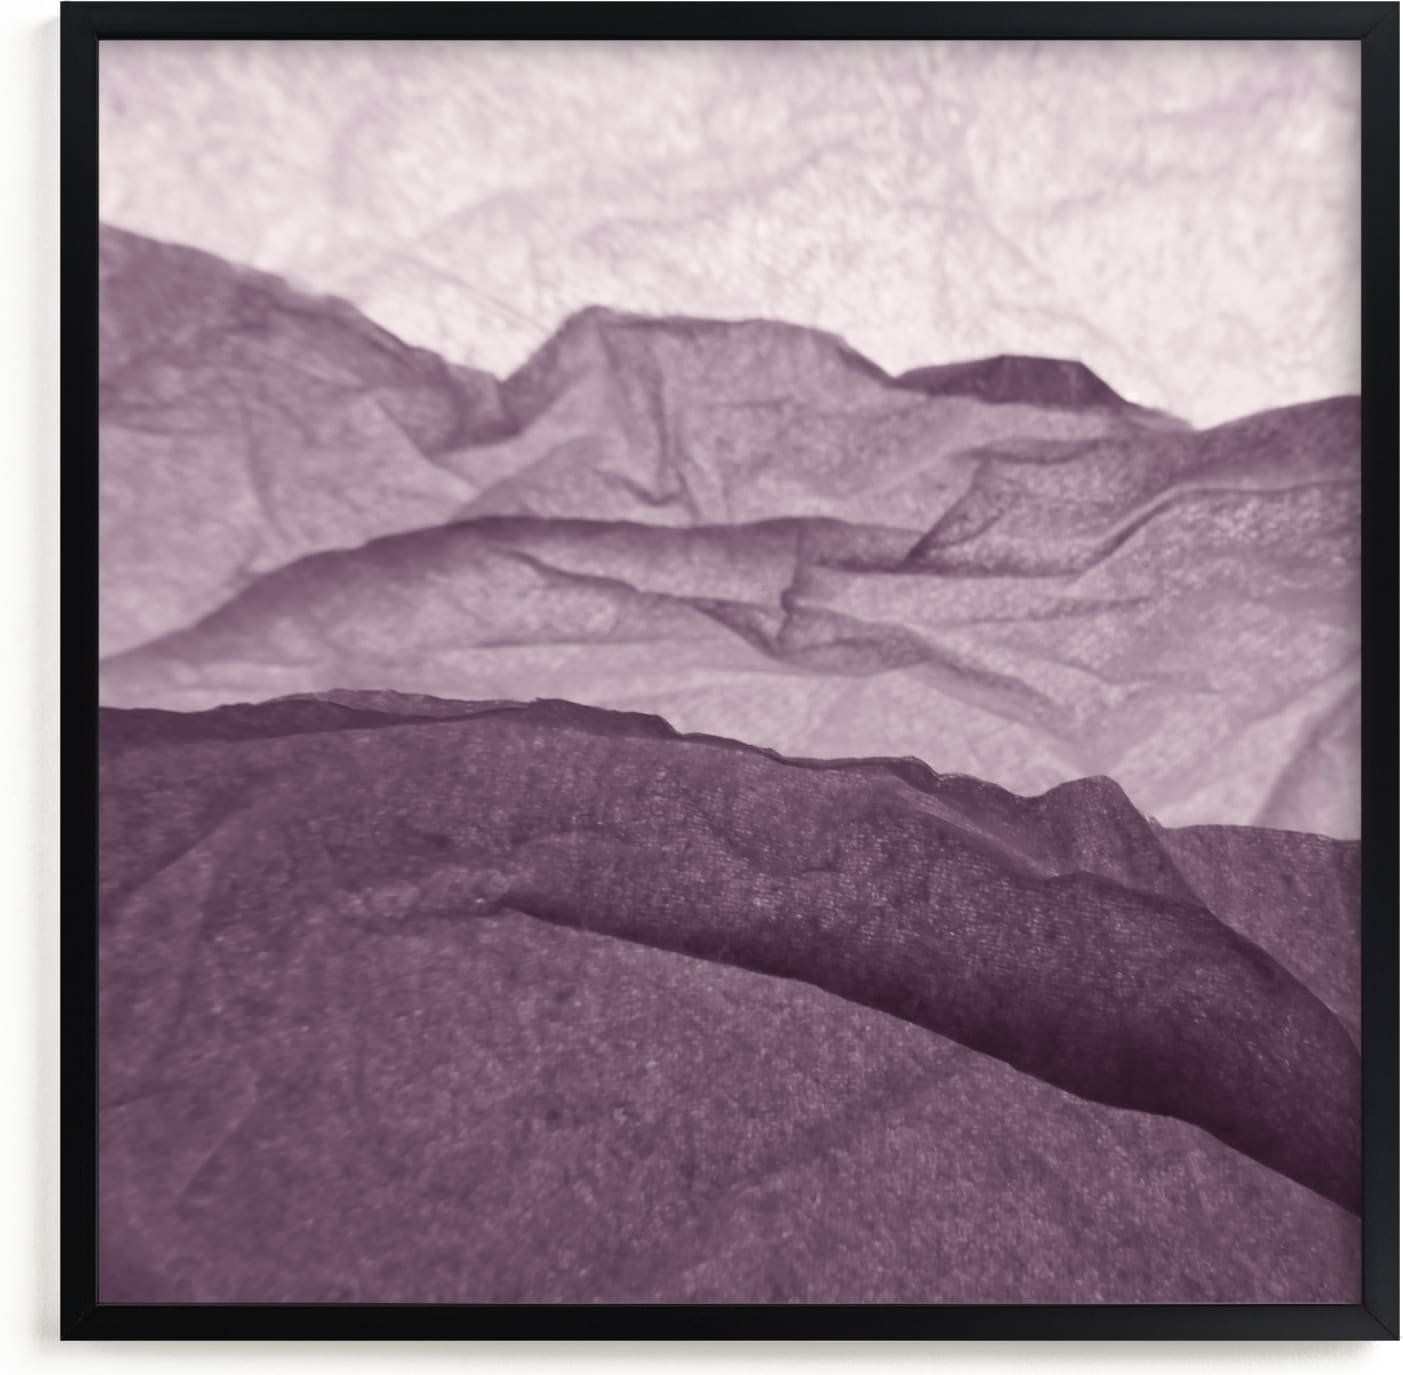 This is a purple art by Shannon Kohn called Paper Napkin Panorama III.